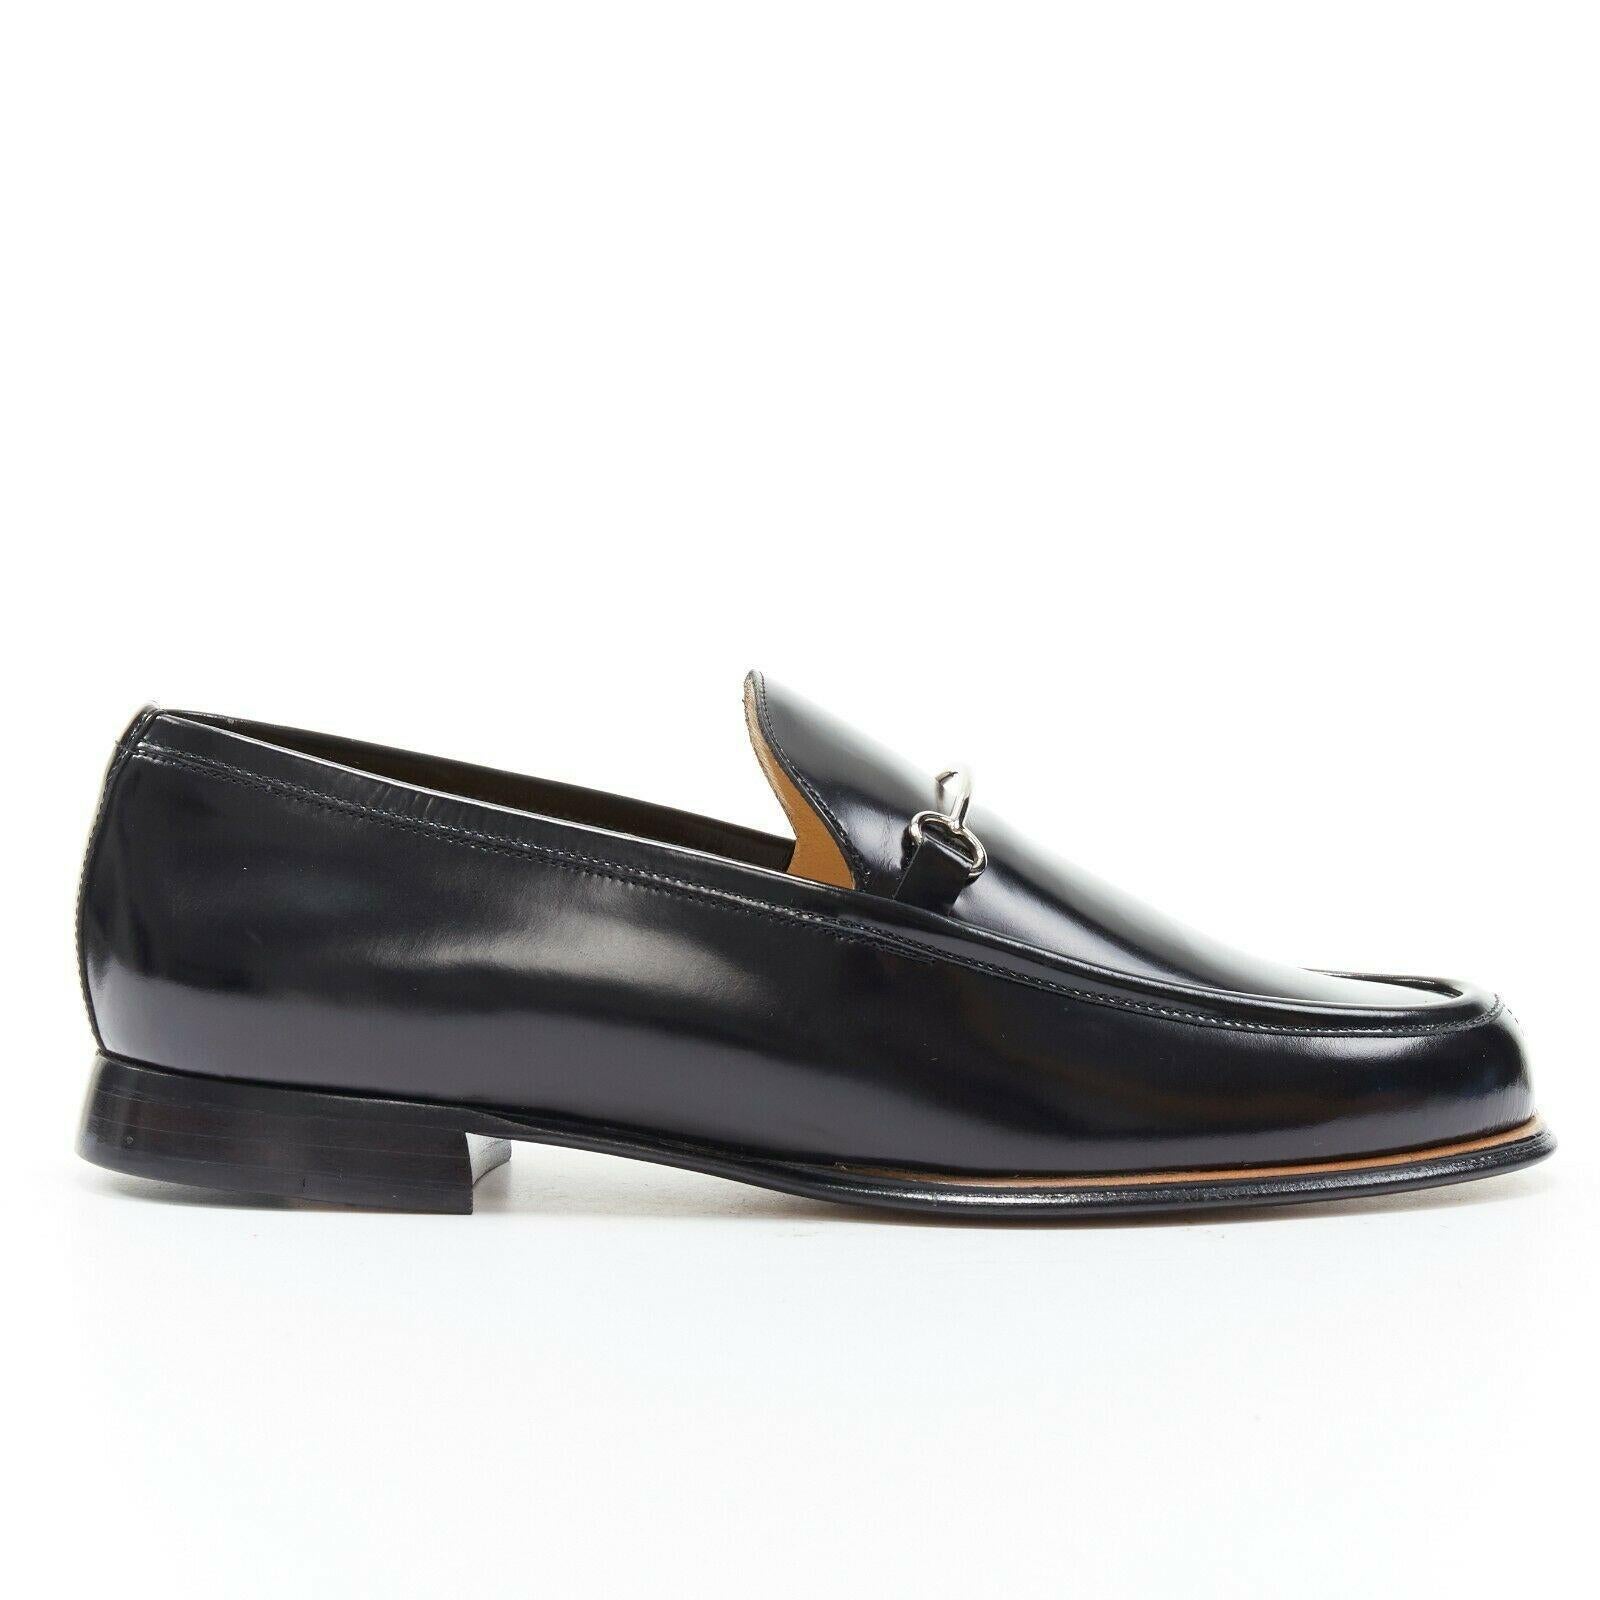 new GUCCI Vintage black leather silver minimal horsebit slip on loafer EU36.5C

GUCCI VINTAGE
Black polished leather upper. Silver-tone minimal horsebit detail. Almond round toe. Tonal stitching. Stacked wood block heel. Slip on loafer. Made in